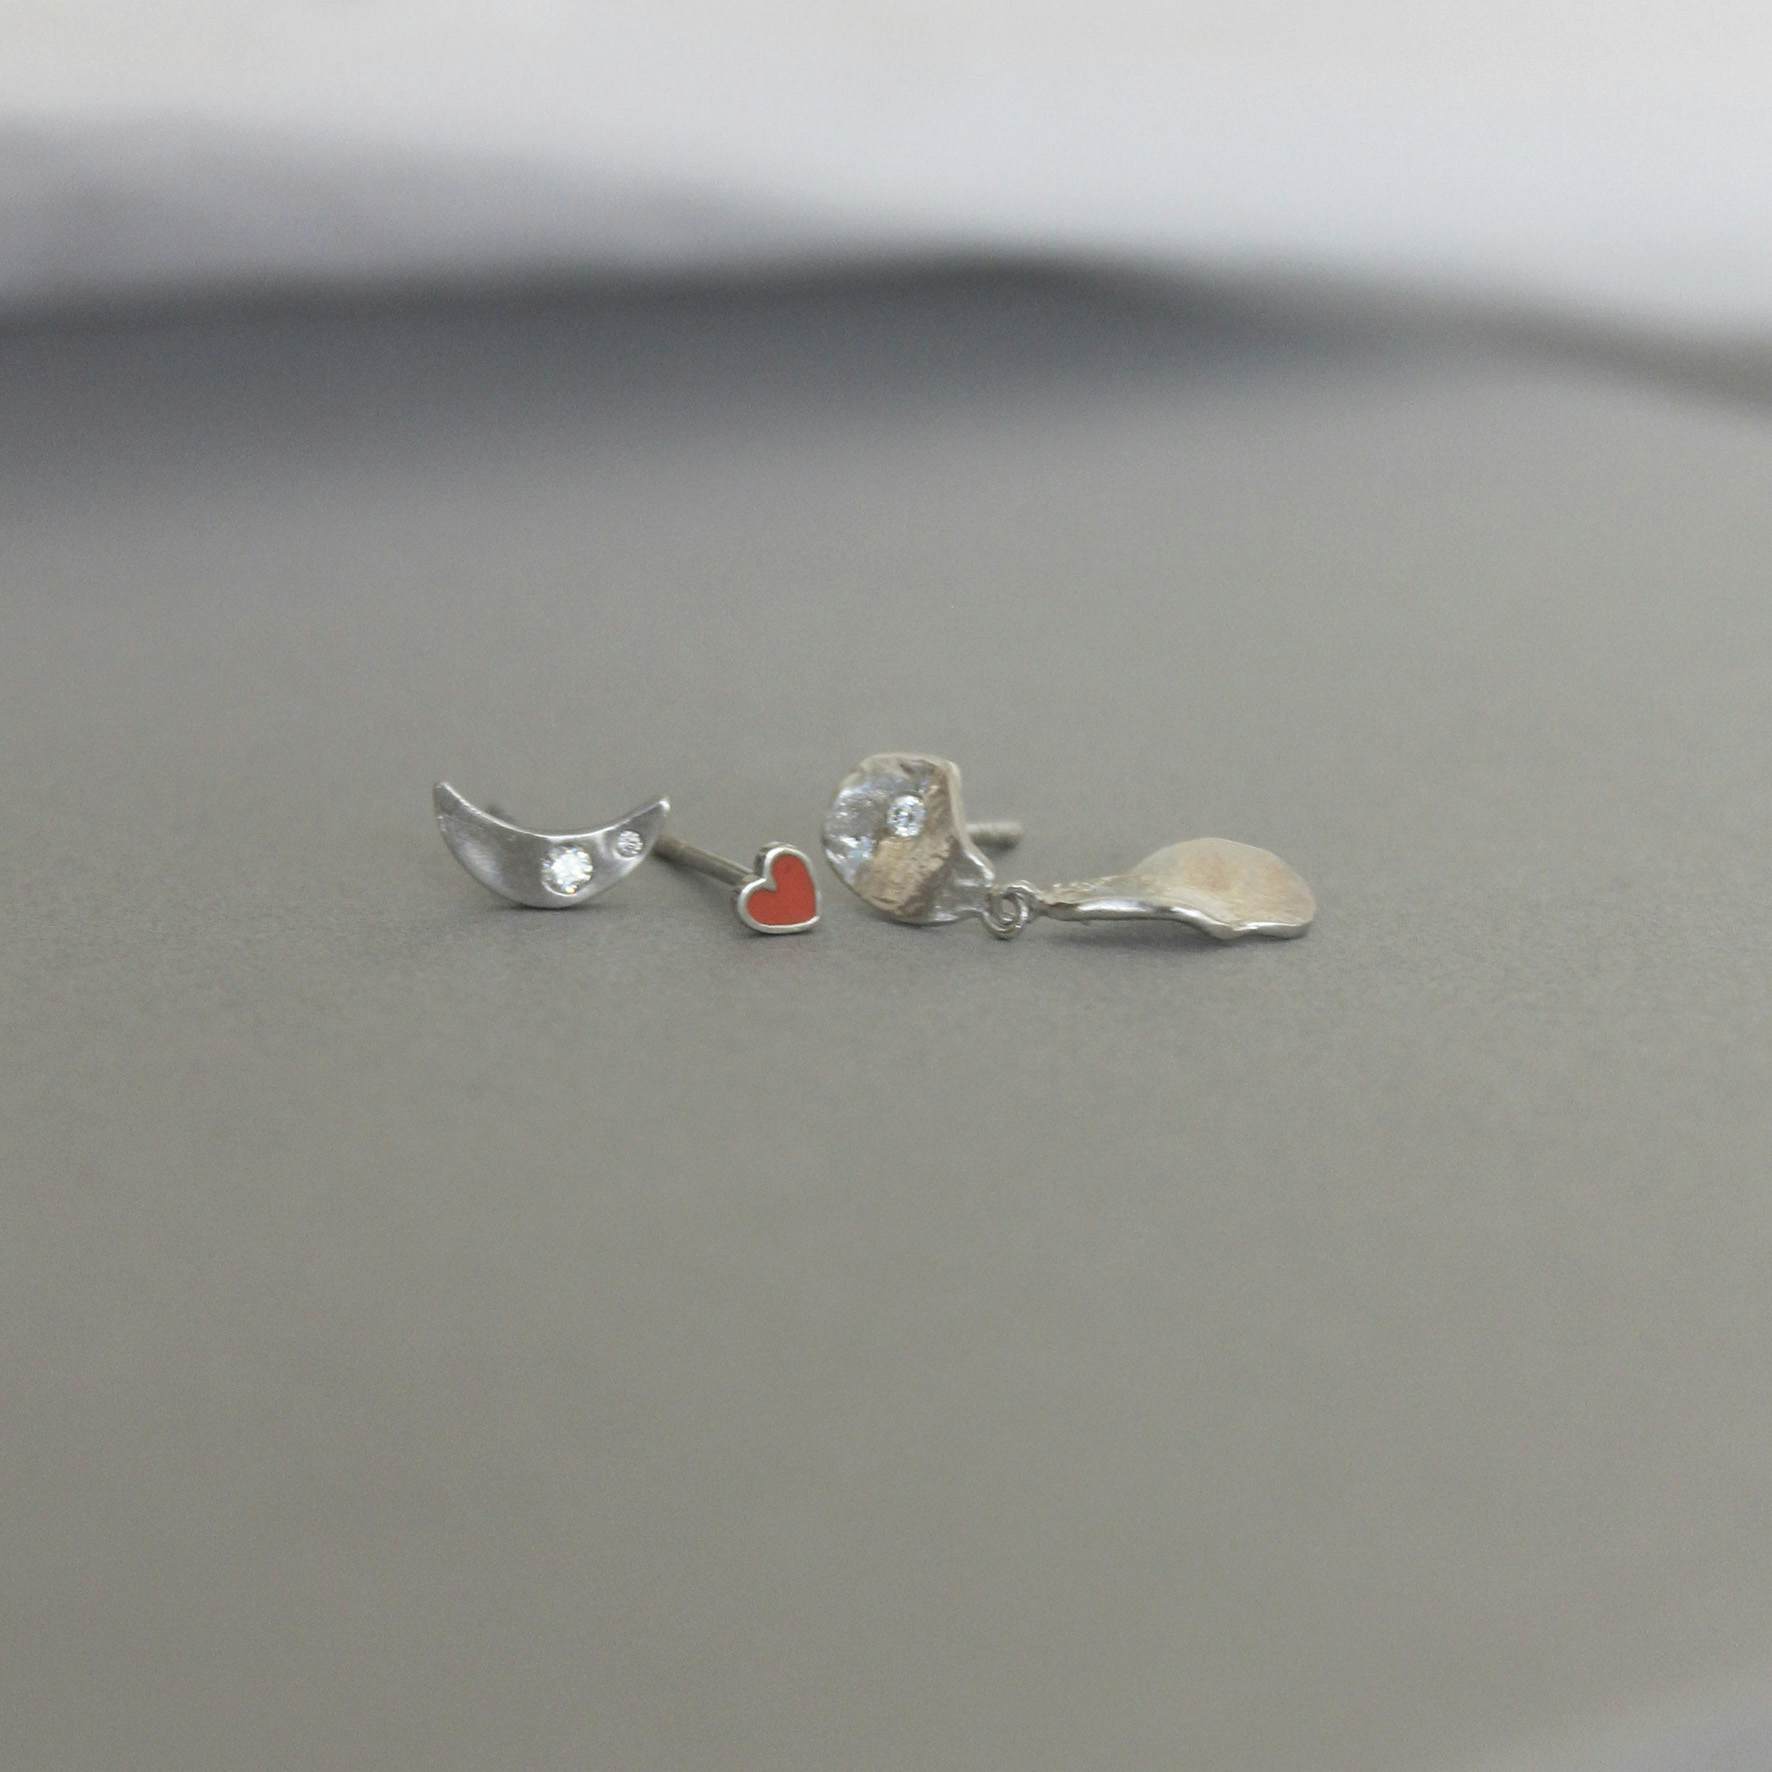 Clear Sea Earring With Stone fra STINE A Jewelry i Sølv Sterling 925